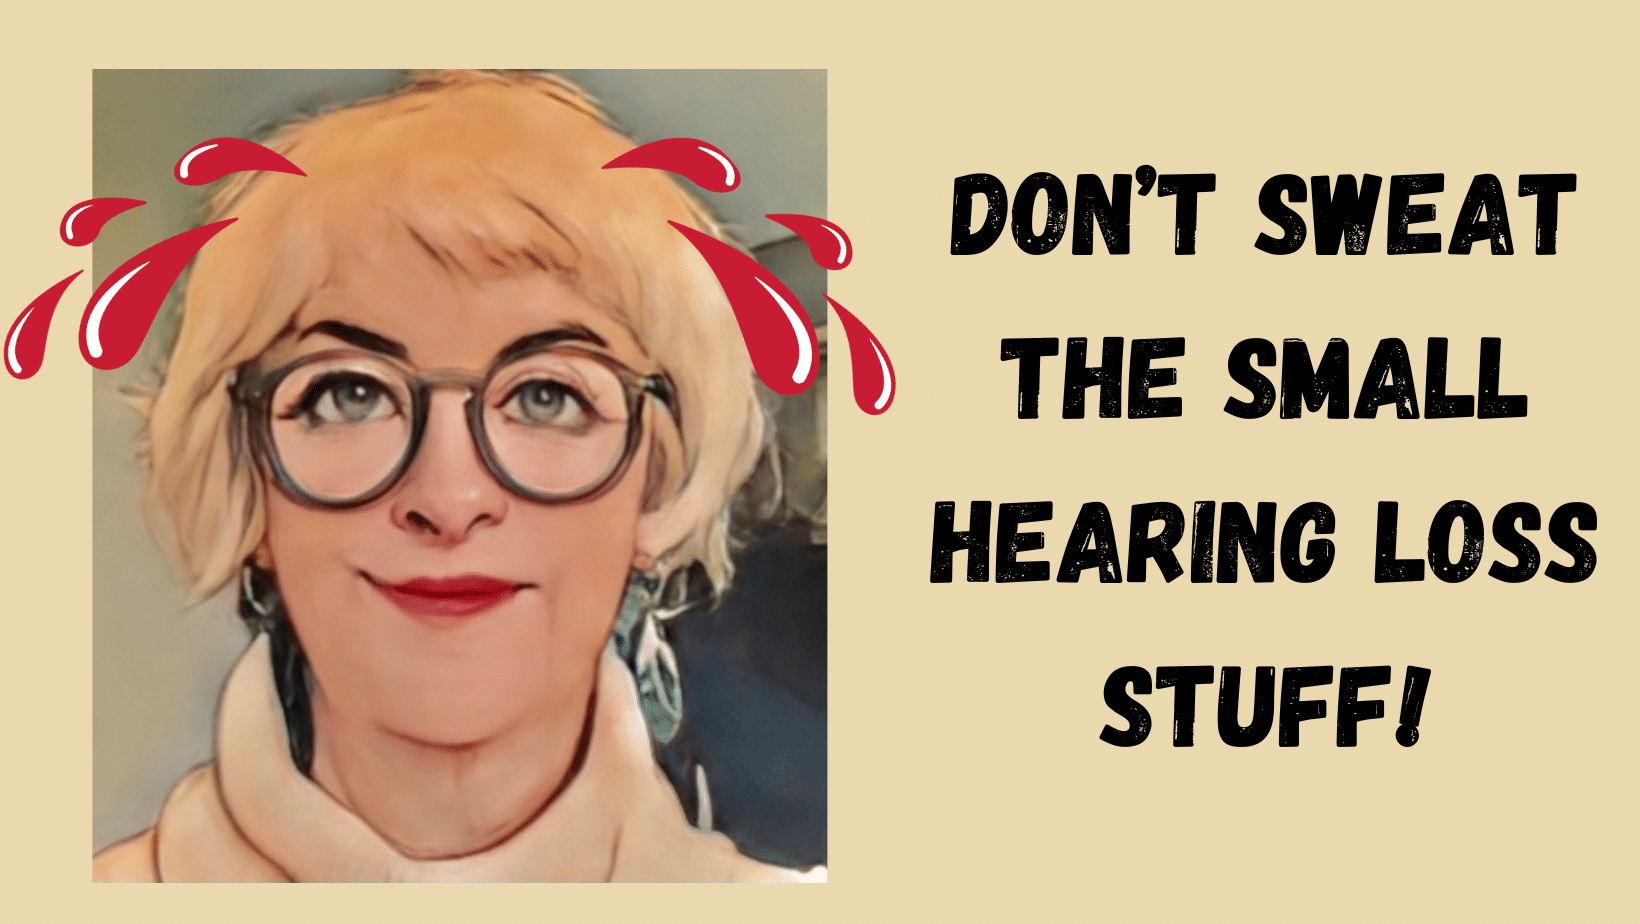 Featured image for “Don’t Sweat the Small “Hearing Loss” Stuff!”